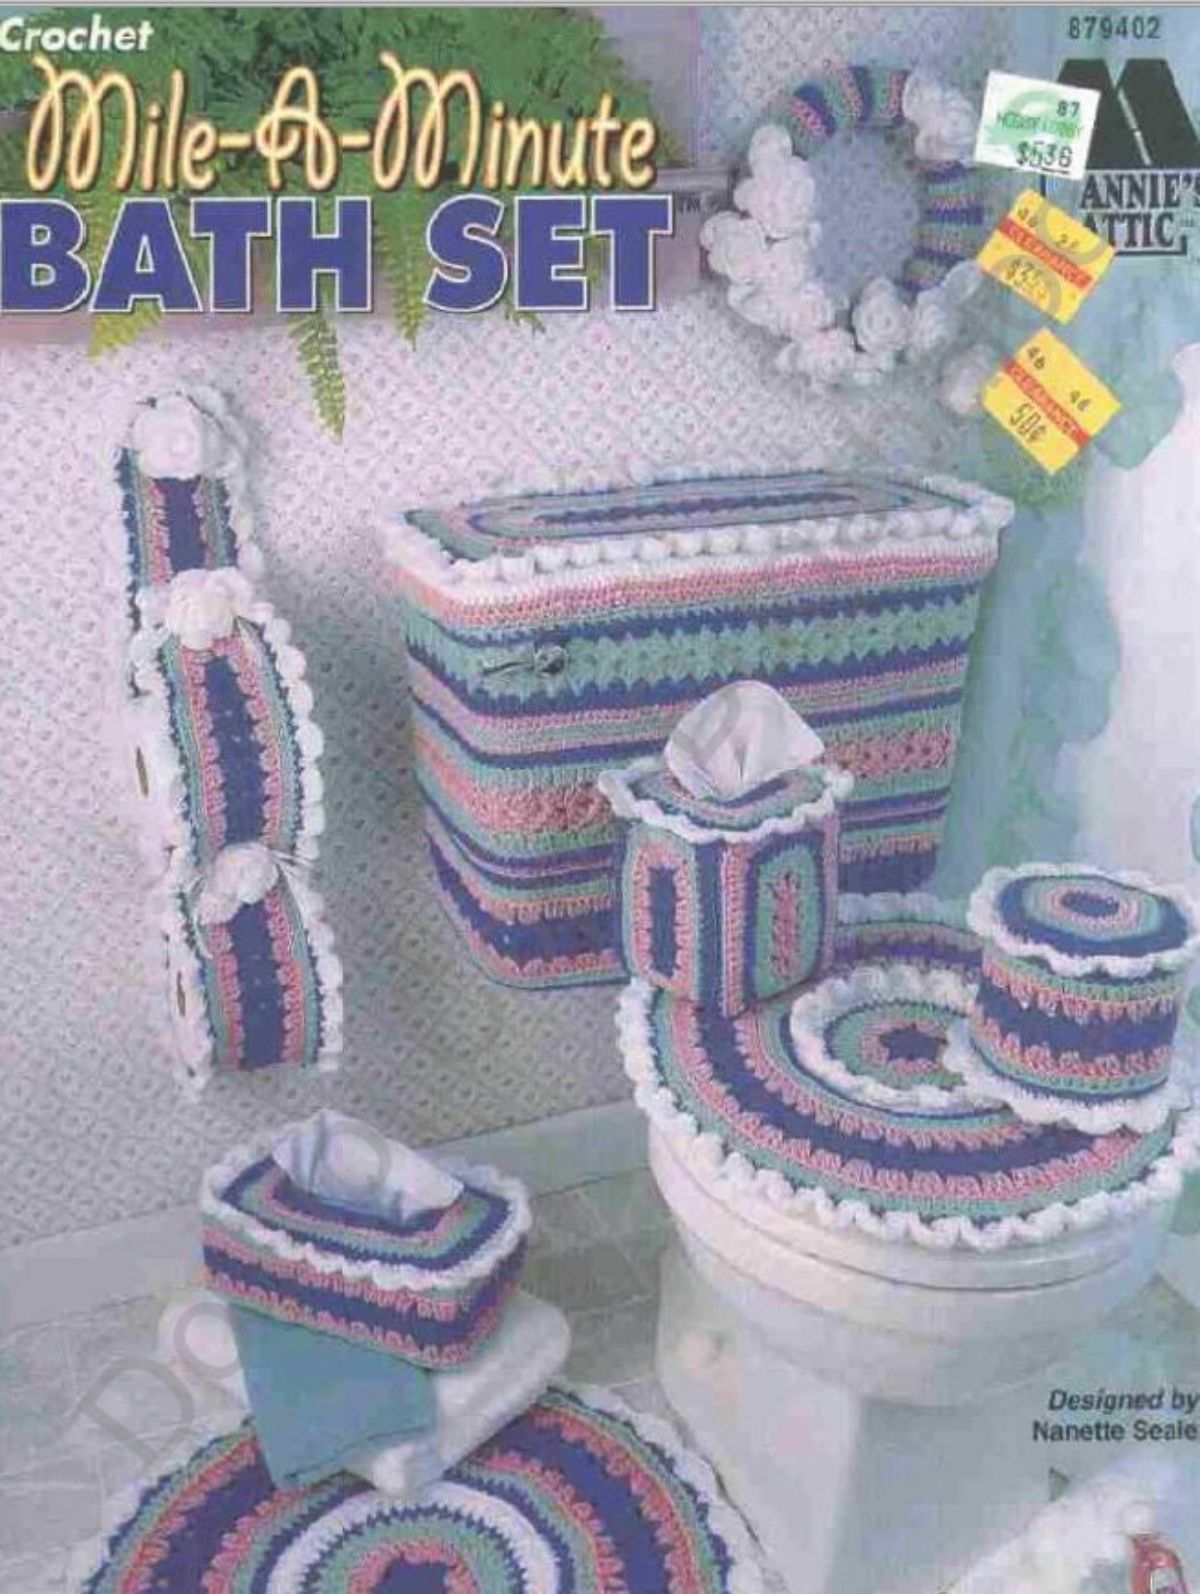 Purple, pink, and green crochet toilet seat cover, railings, mat, and toilet roll cover placed in a white bathroom.